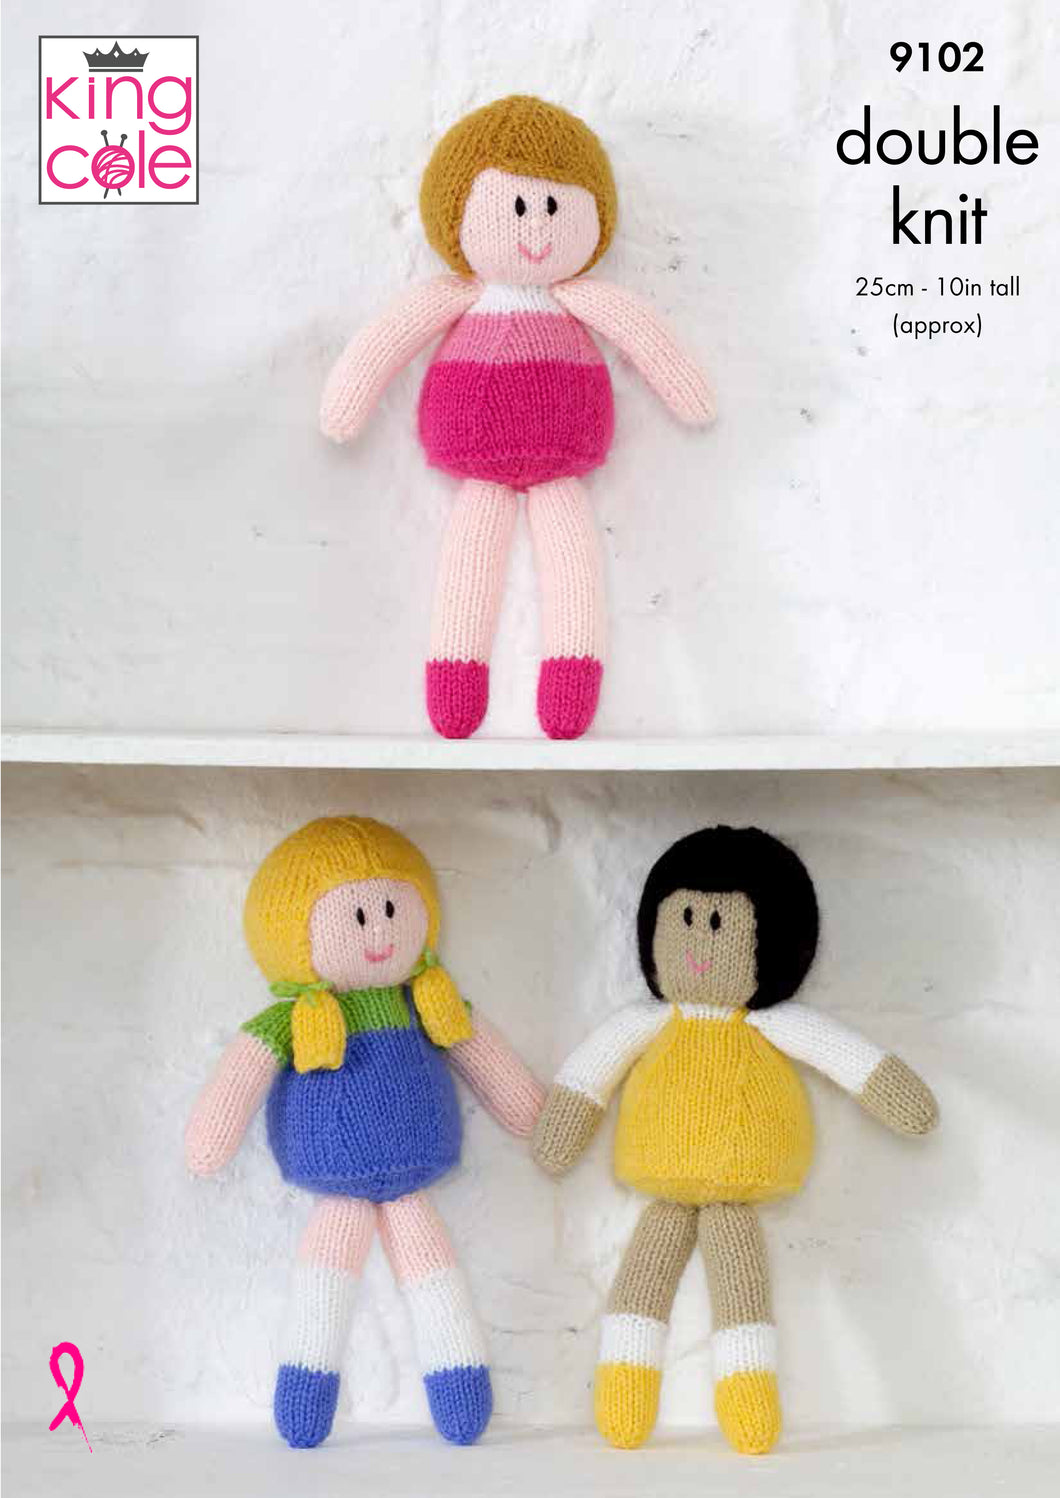 Dolls Knitted in Big Value DK 50g 9102